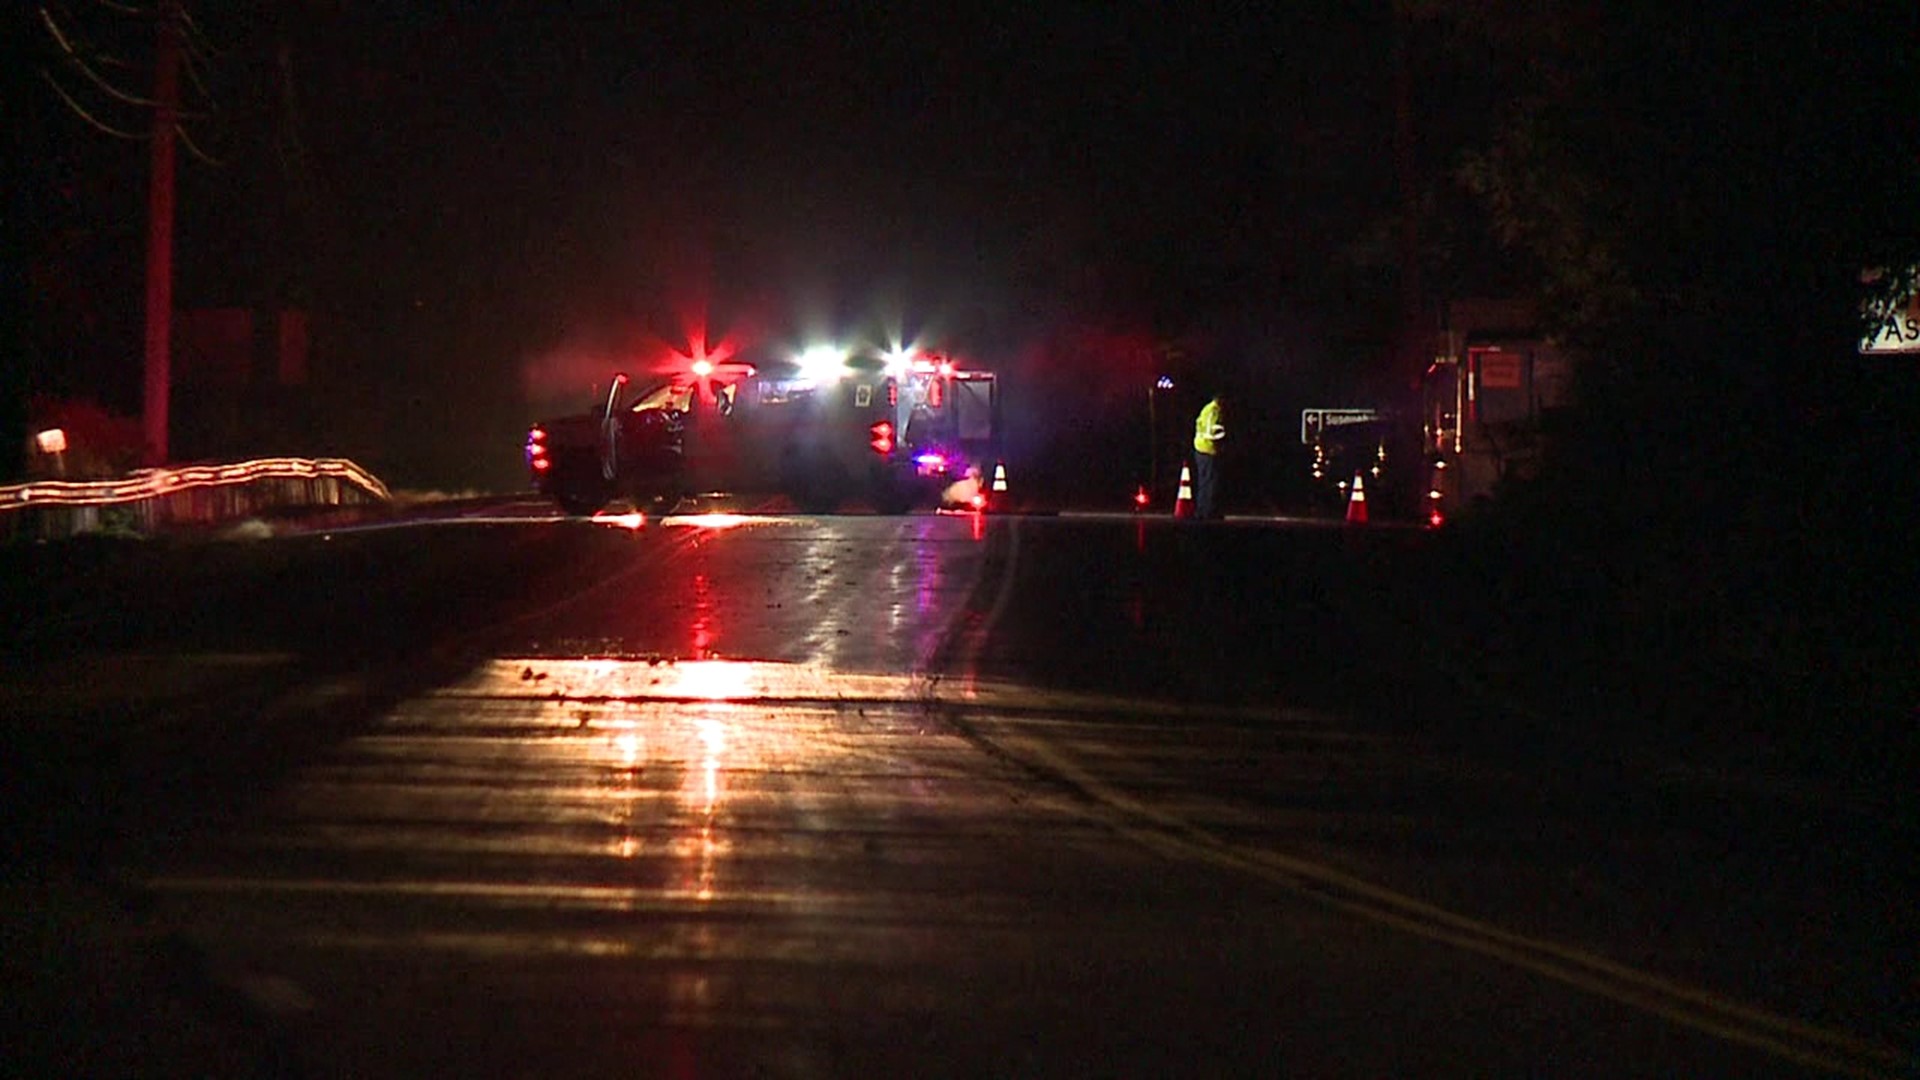 The crash happened just before 8 p.m. along Route 11 in Plymouth Township.